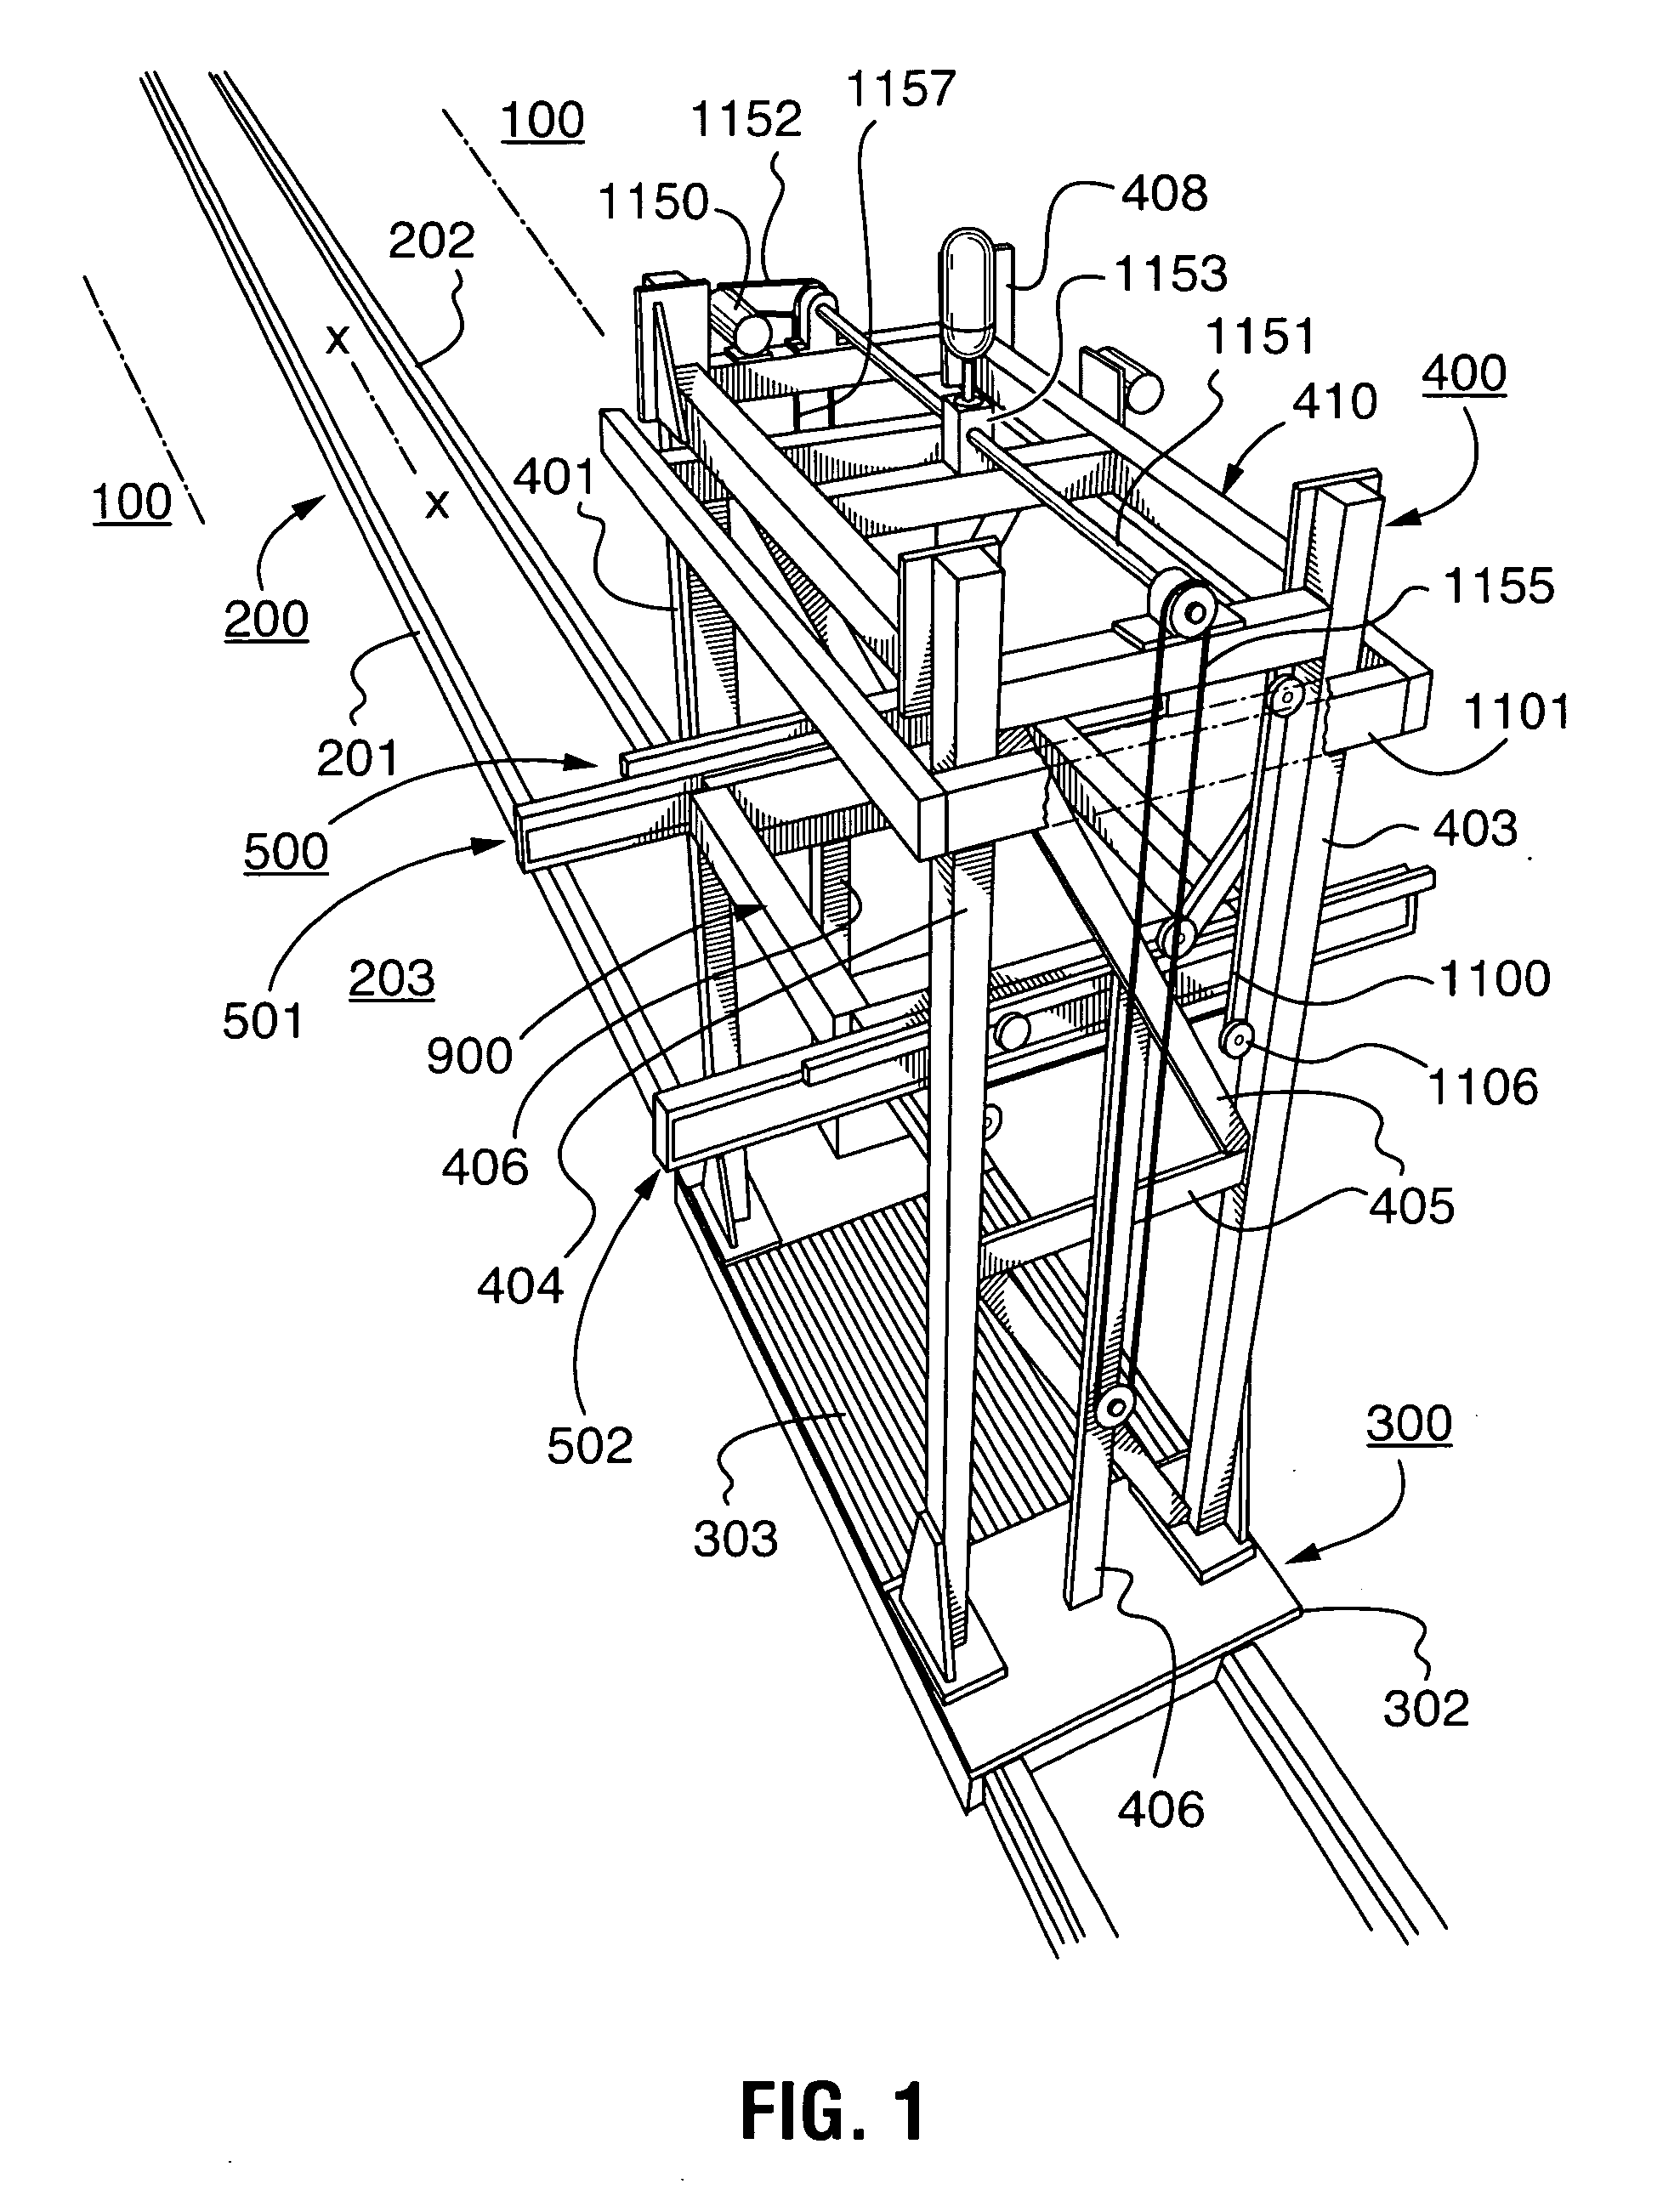 Article retrieving and positioning system and apparatus for articles, layers, cases, and pallets